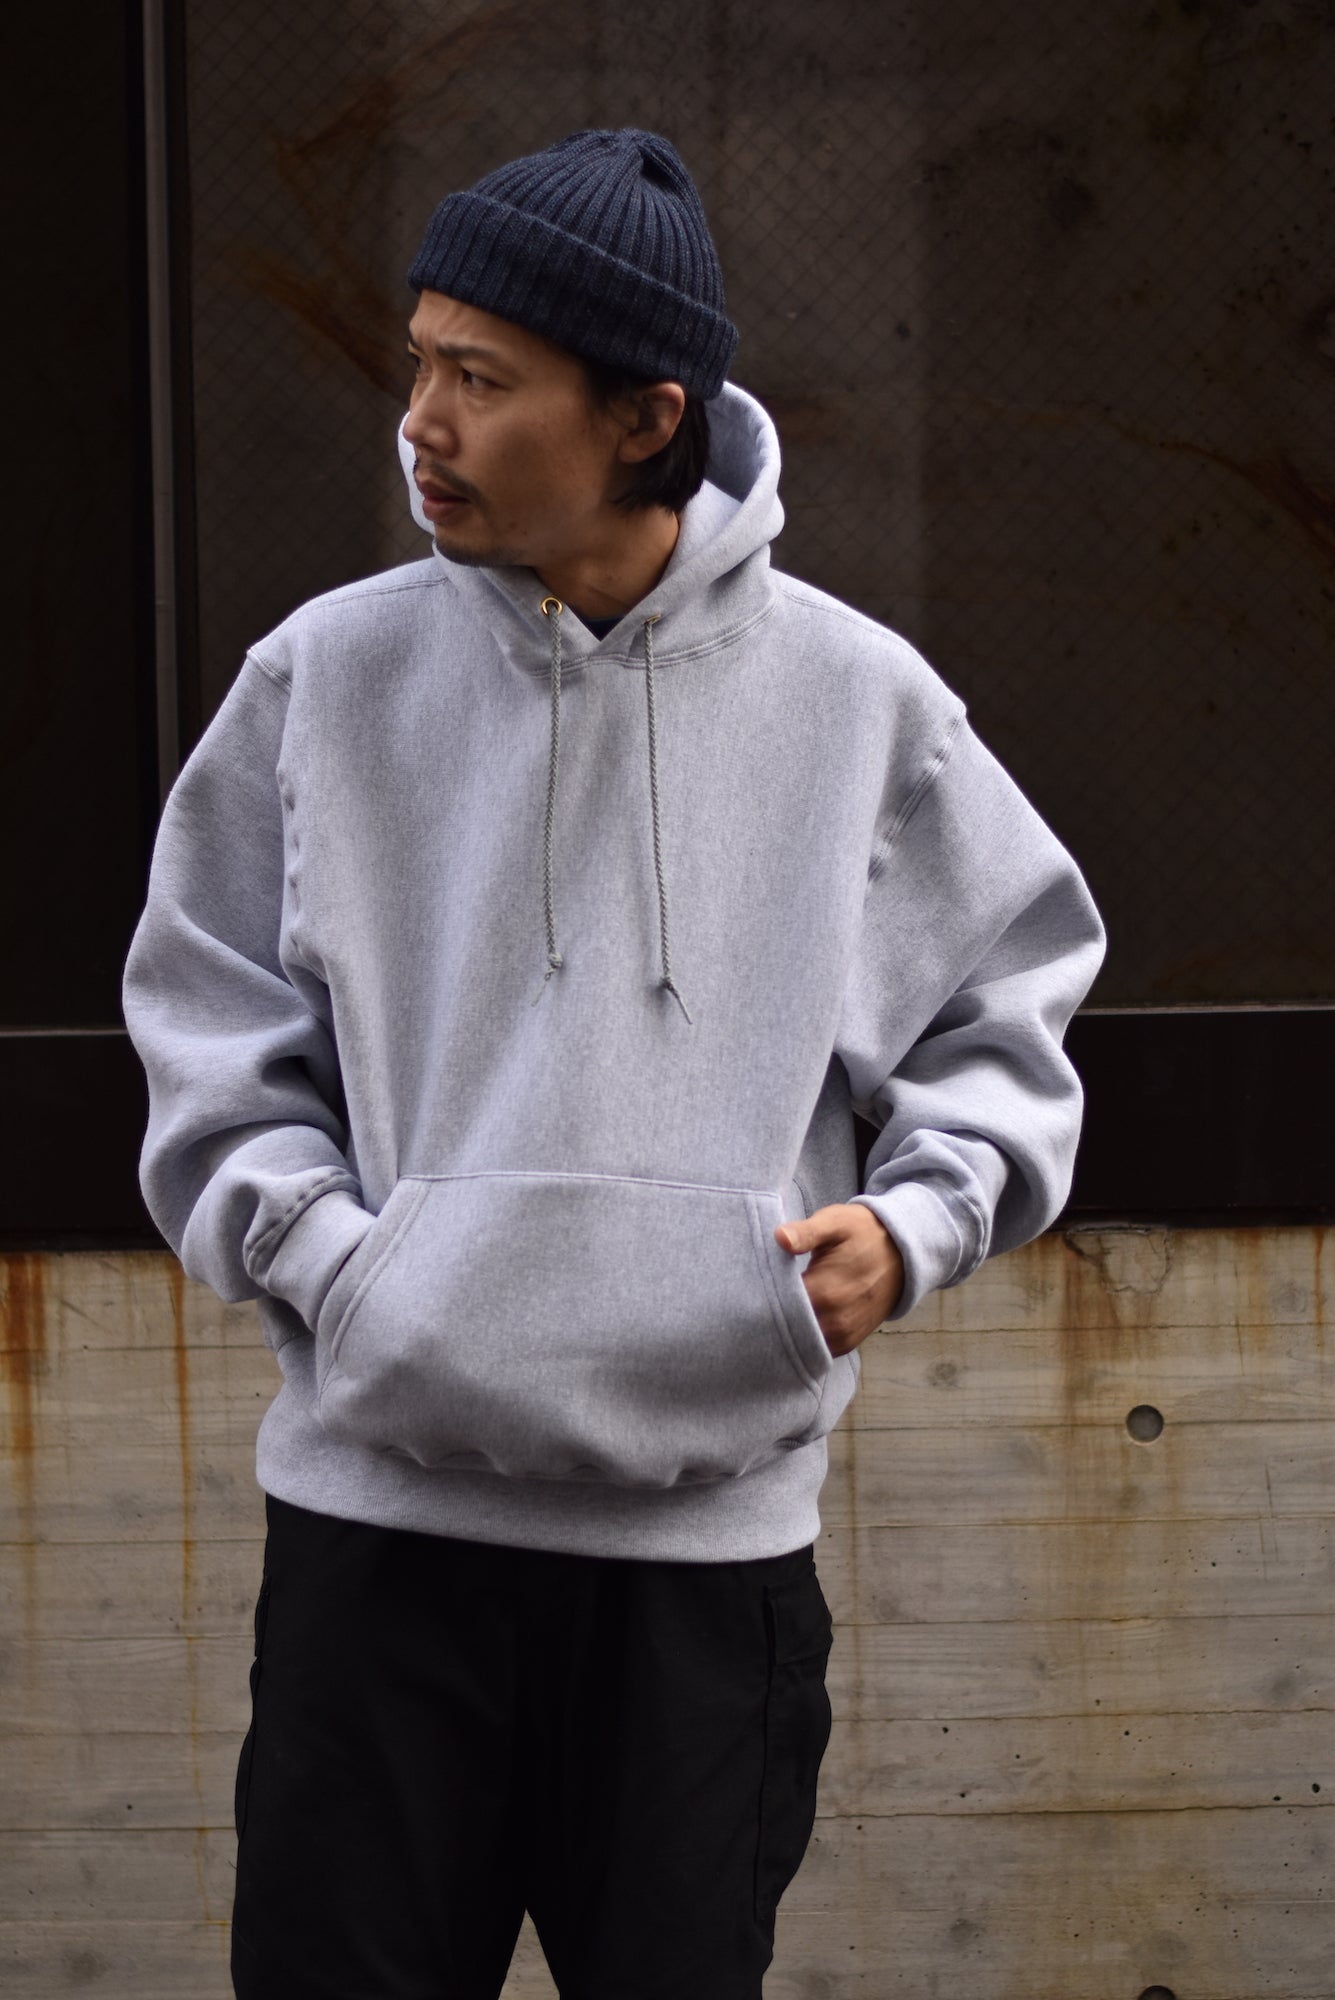 CAMBER】CROSS KNIT PULLOVER HOODED PARKA 着用編 | スマクロ原宿店の